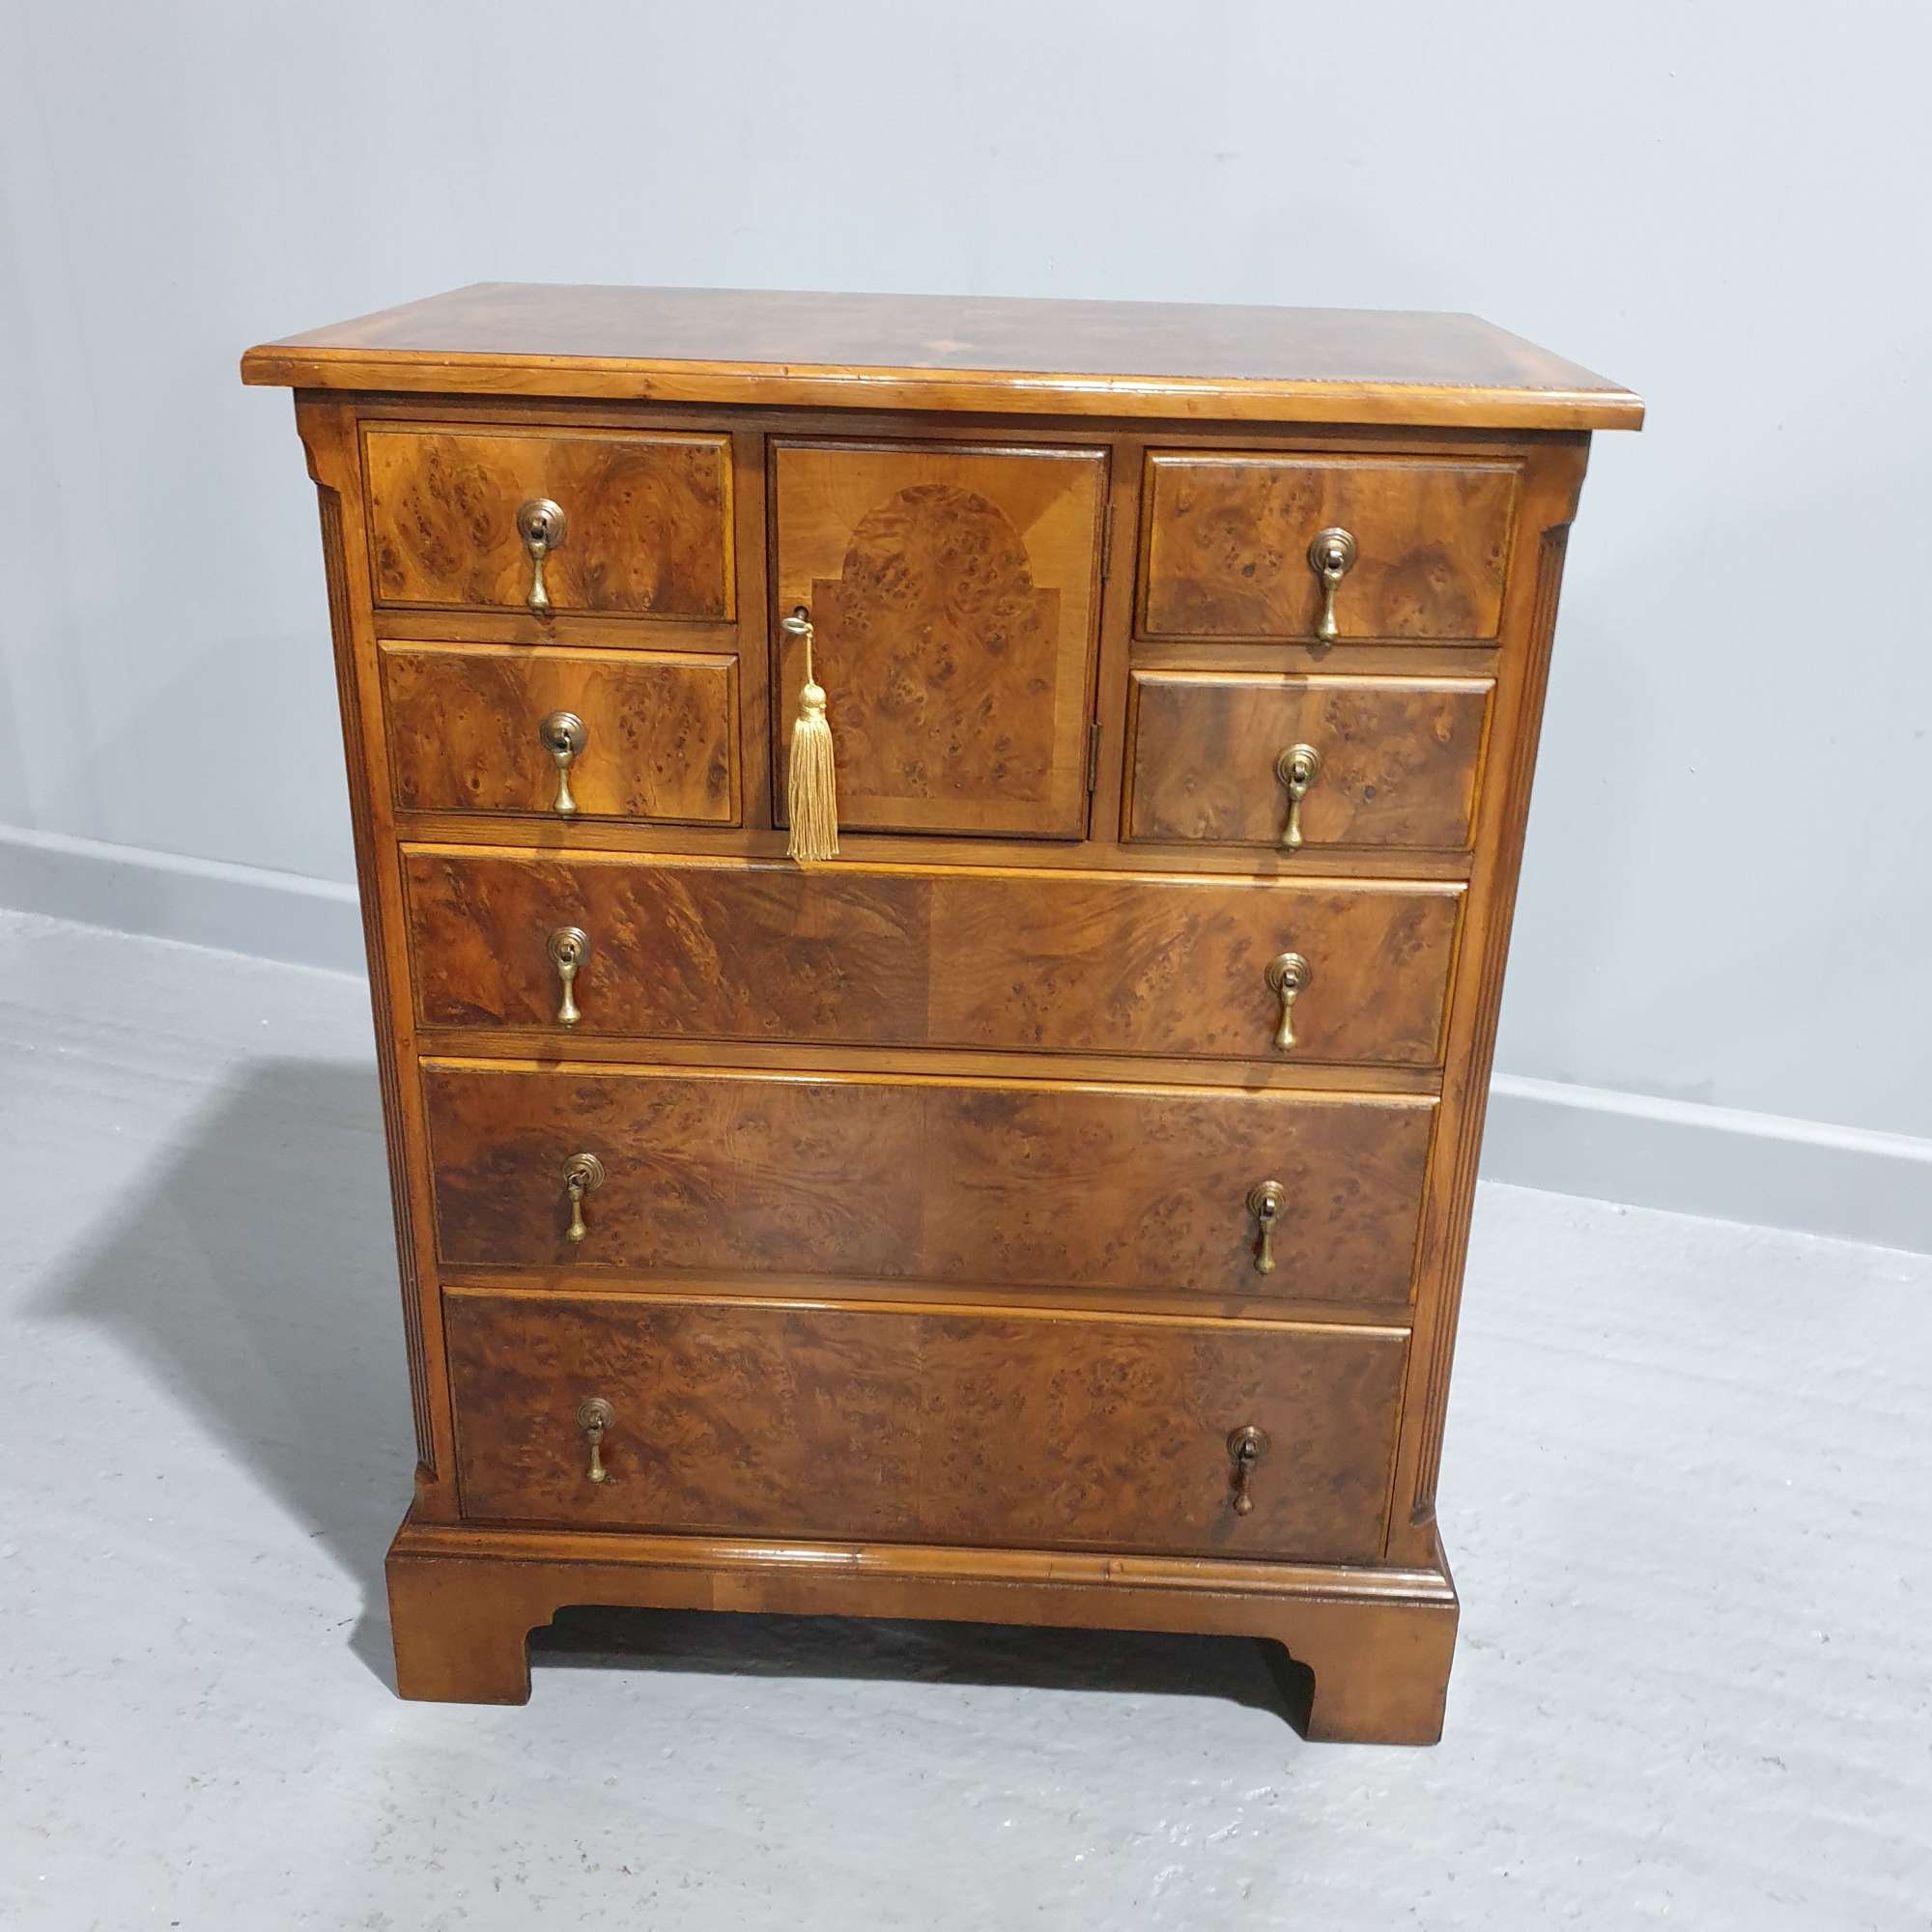 Superb Yew Wood Chest Of Drawers